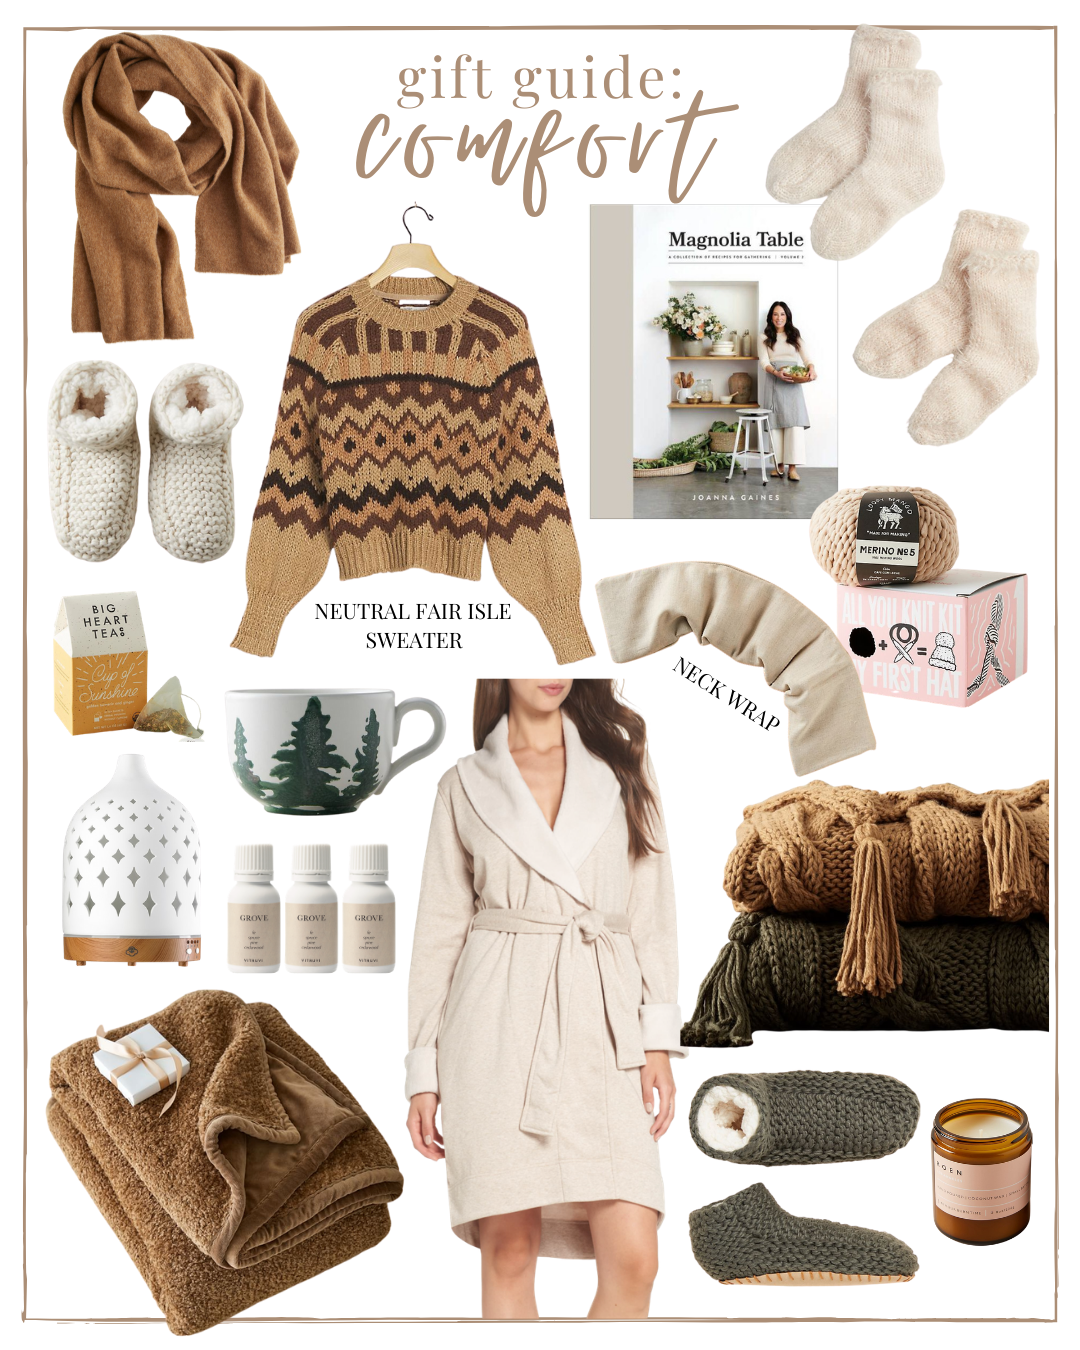 2020 Holiday Gift Guide Comfort - a gift guide for the homebody & those trying to find more comfort at home | Louella Reese